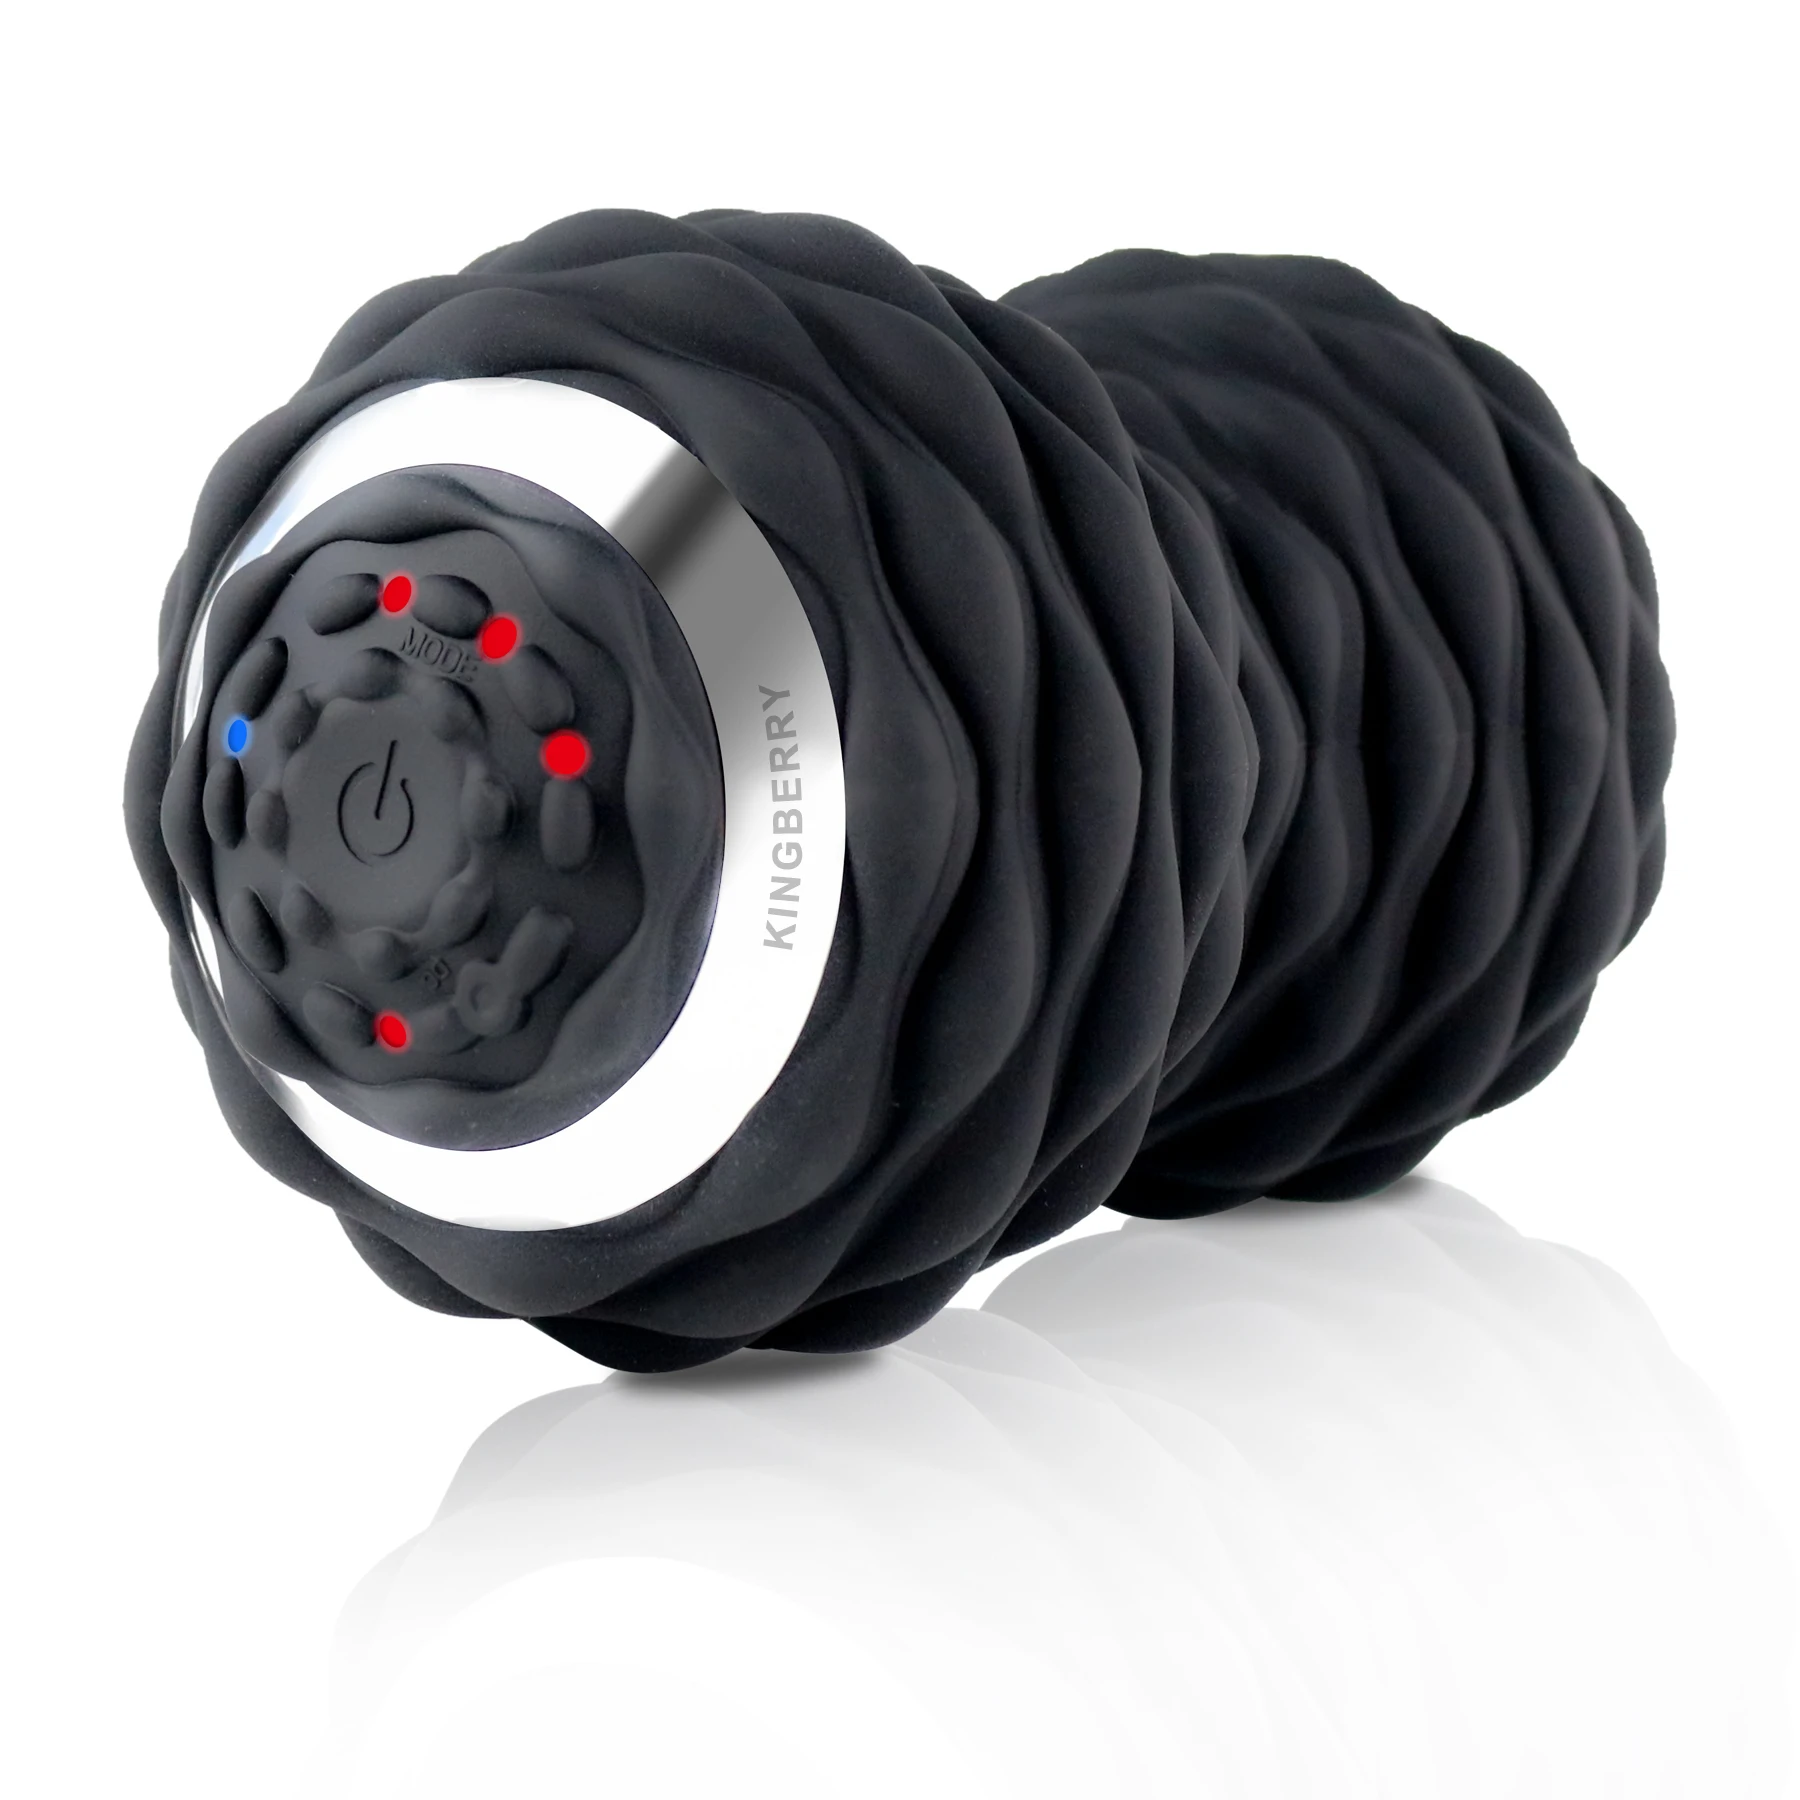 

4-Speed Vibrating Massage Ball - Peanut Massager Combines a Lacrosse Ball with Vibrating Foam Roller | Peanut Massage Ball, Black blue red